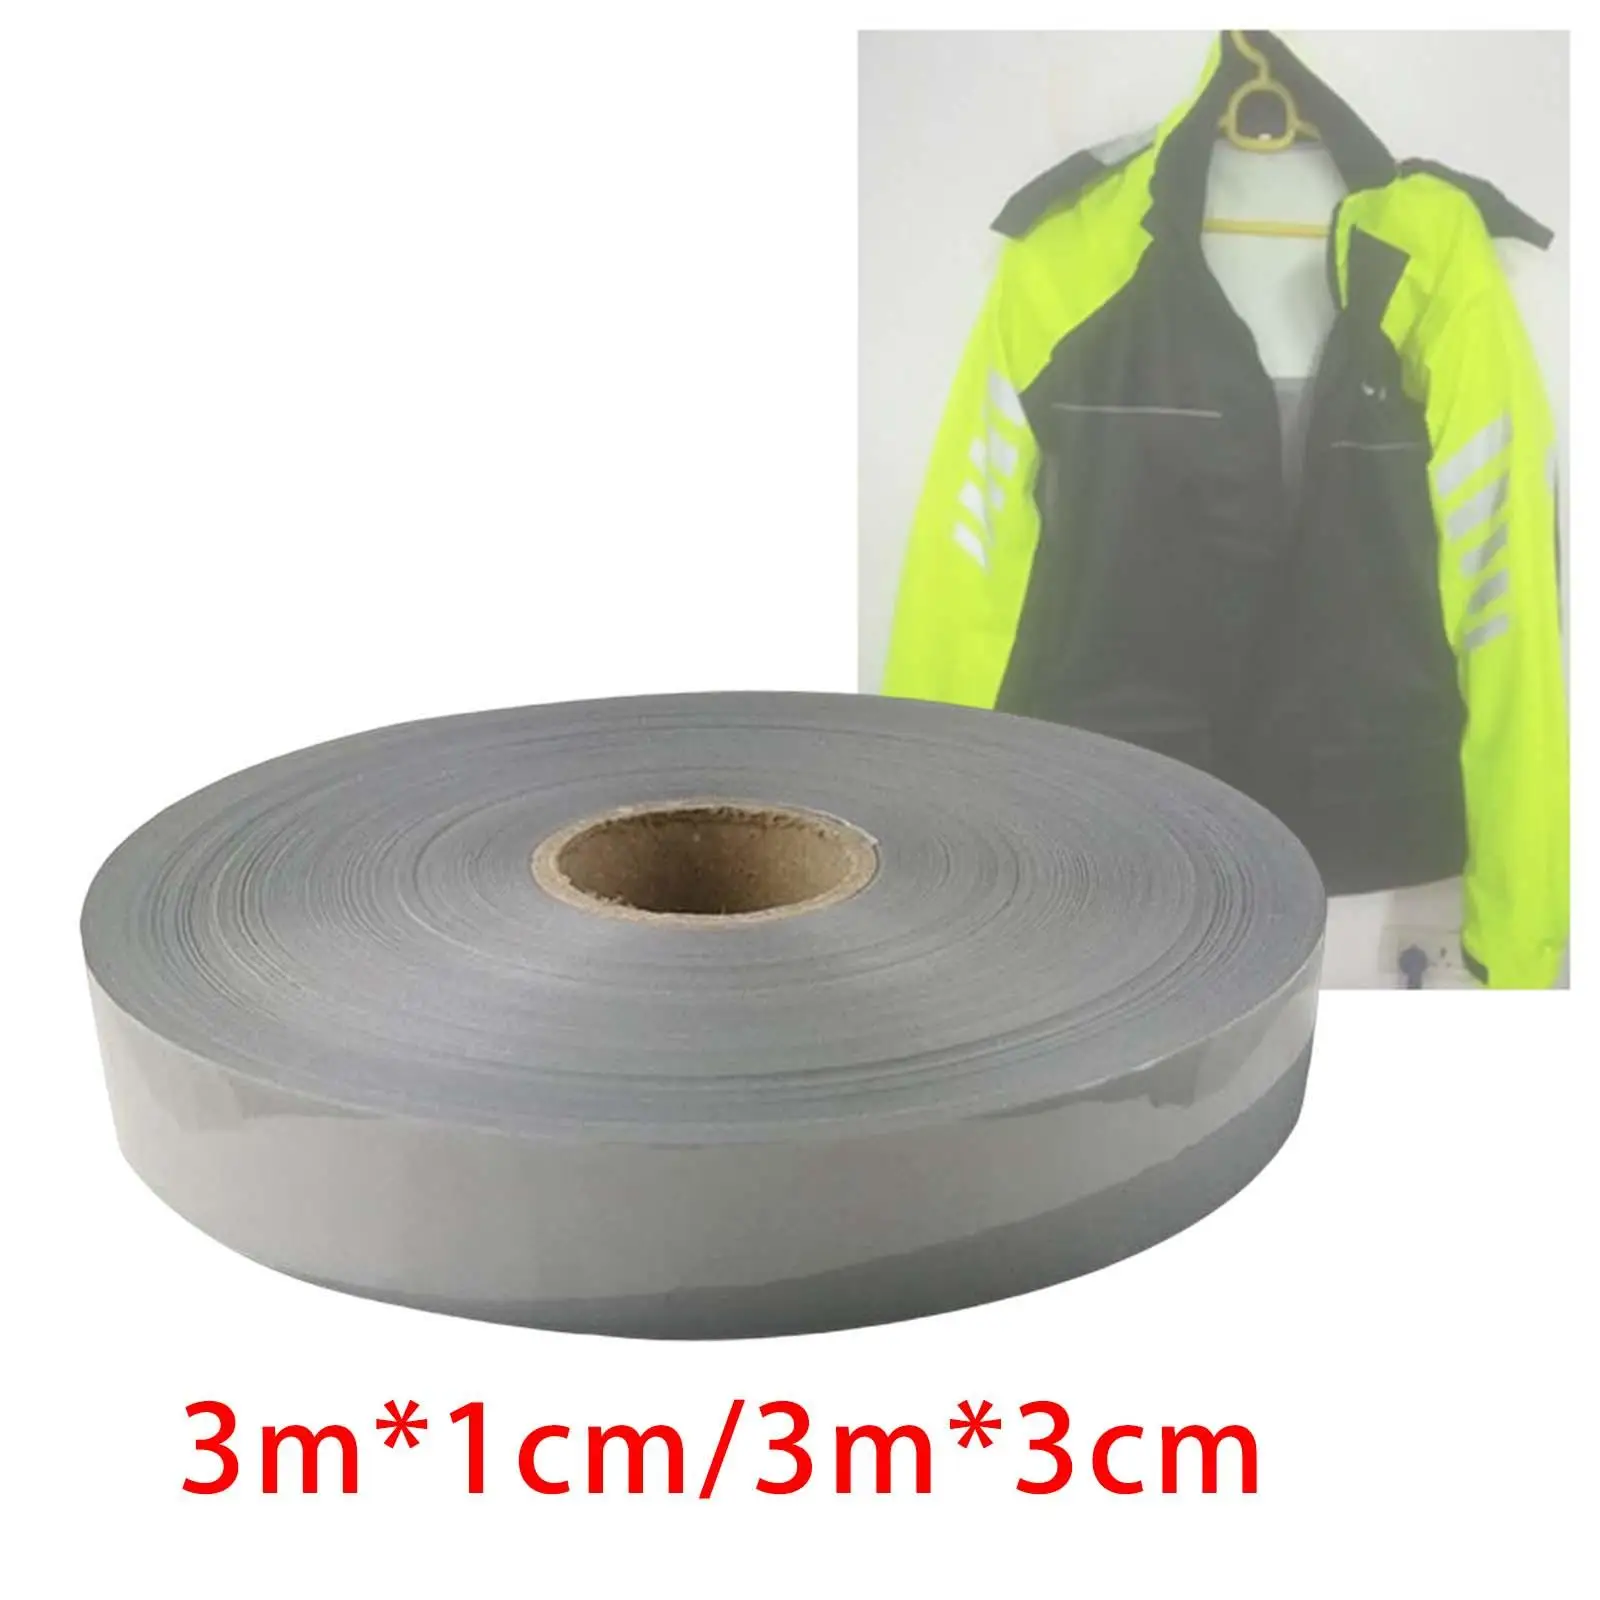 Iron On Reflective Tape High Visibility Heat Transfer Vinyl Fabric Reflective Material Warning Belt Premium for Clothing Outdoor